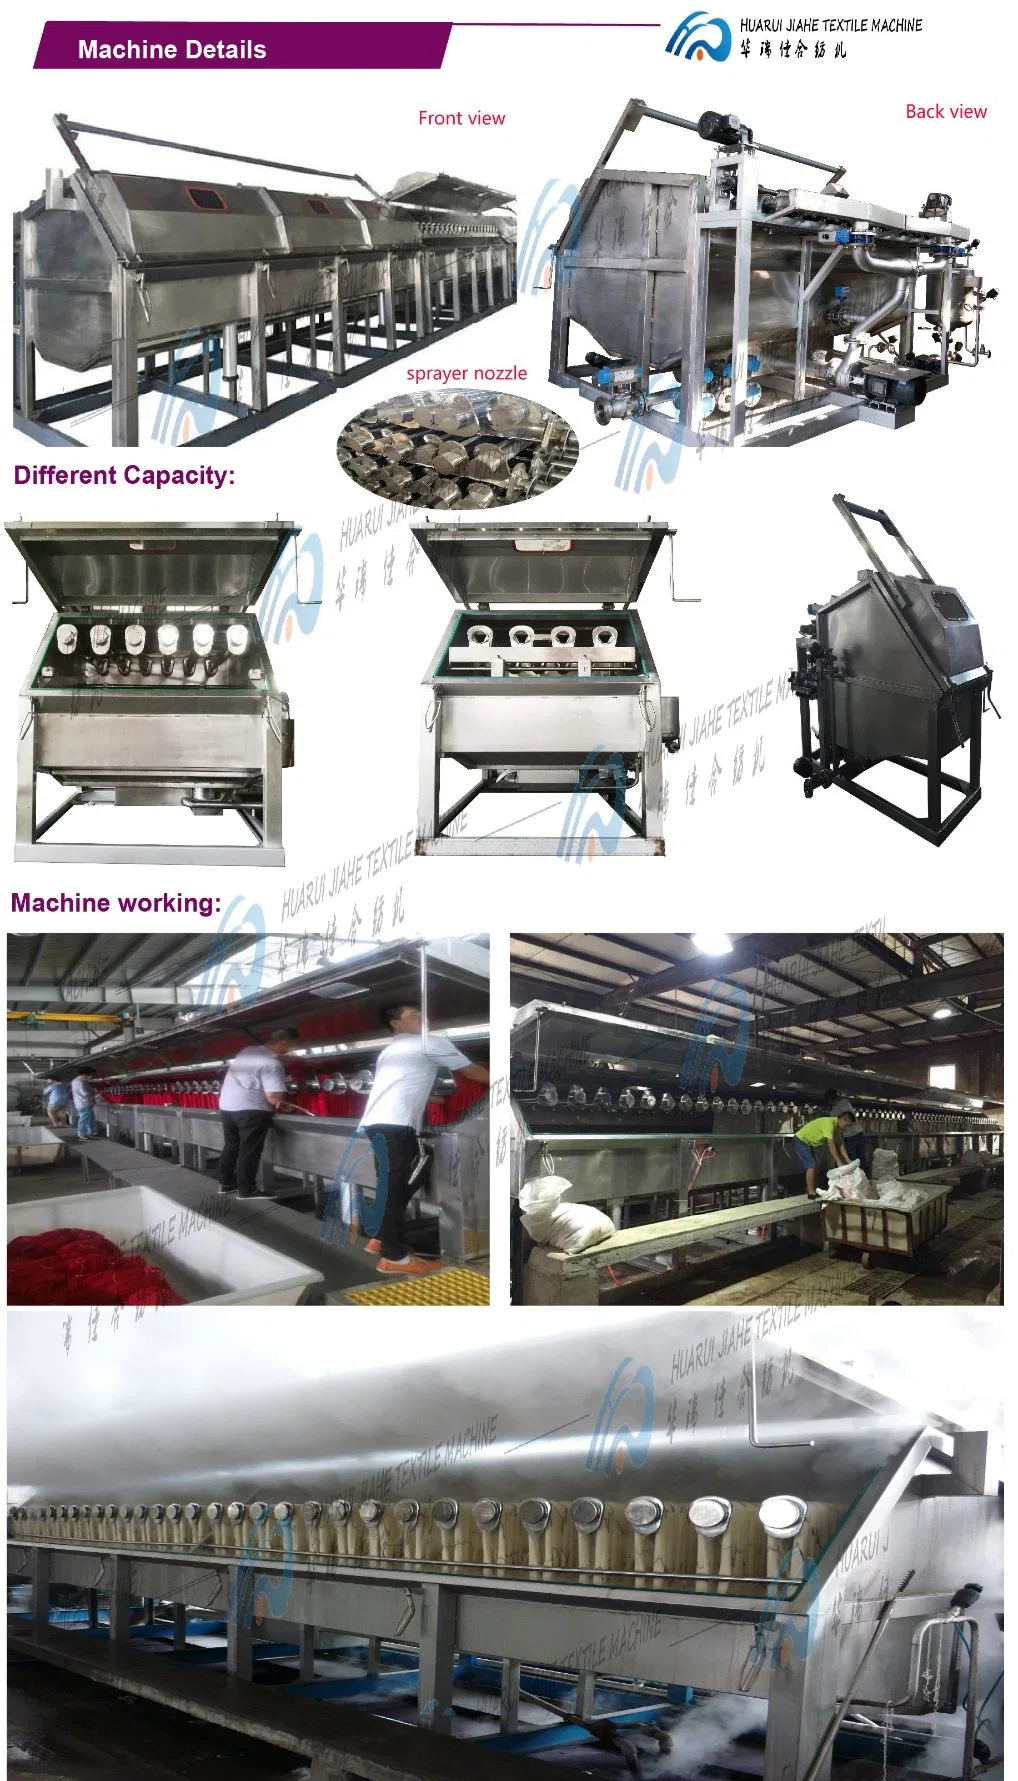 China Supplier Normal Temperature Spray Type Hank Yarn Dyeing Machine Prototype Textile Dyeing and Finishing Machinery